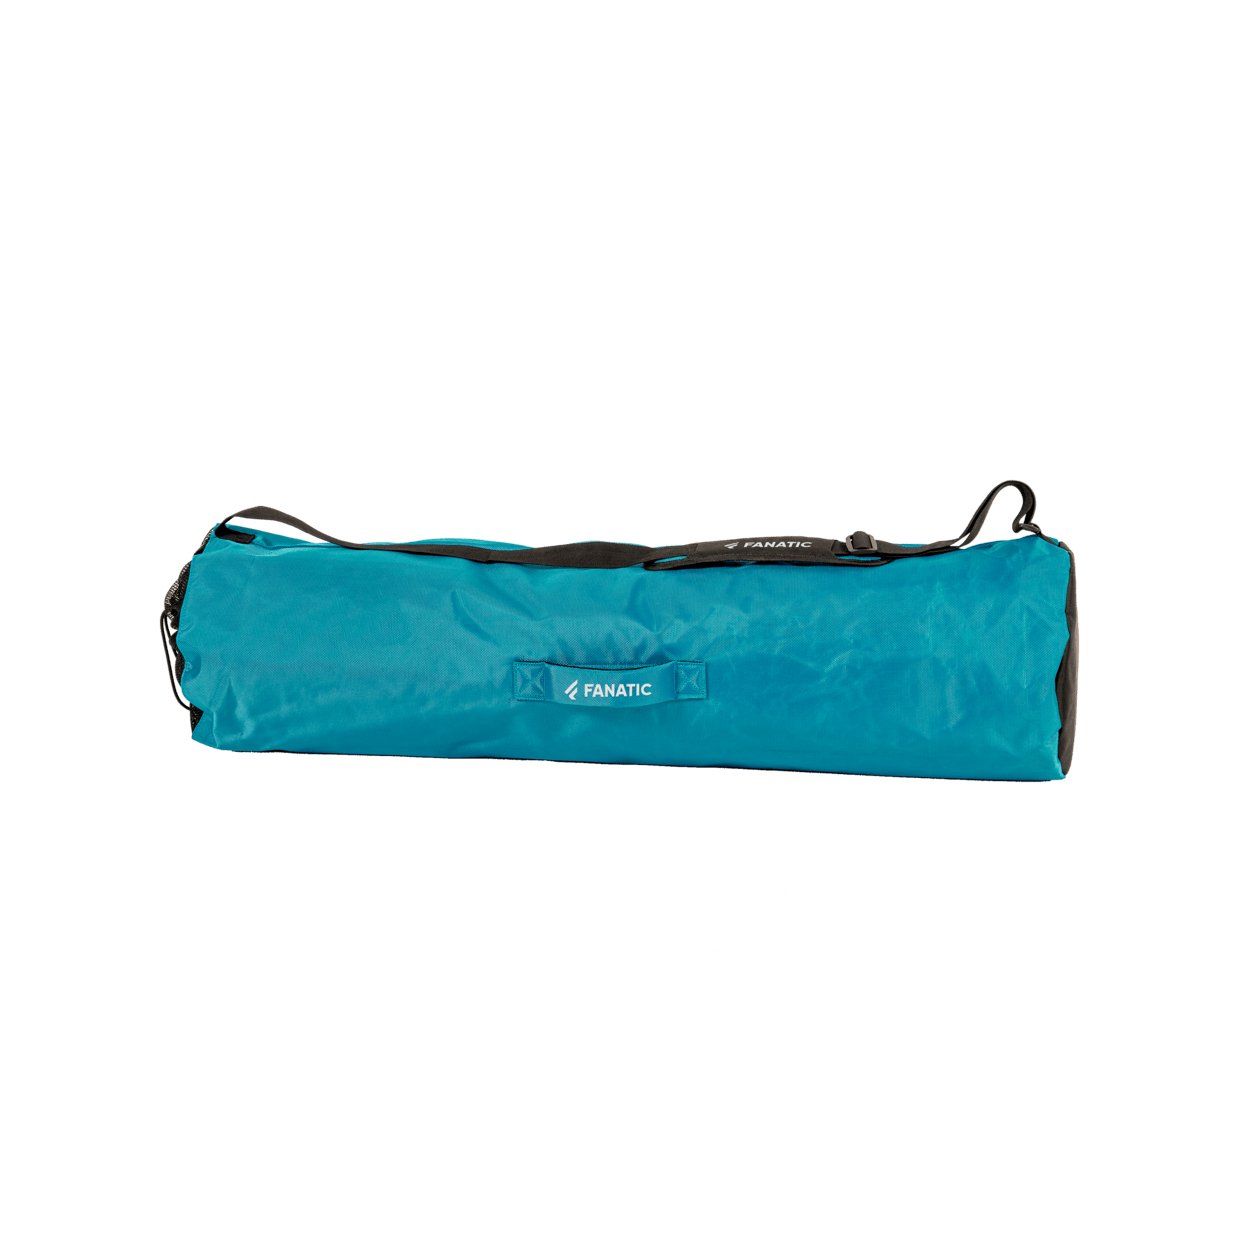 Fanatic Gearbag Air Mat 2024 - Worthing Watersports - 9008415934010 - Spareparts - Fanatic SUP